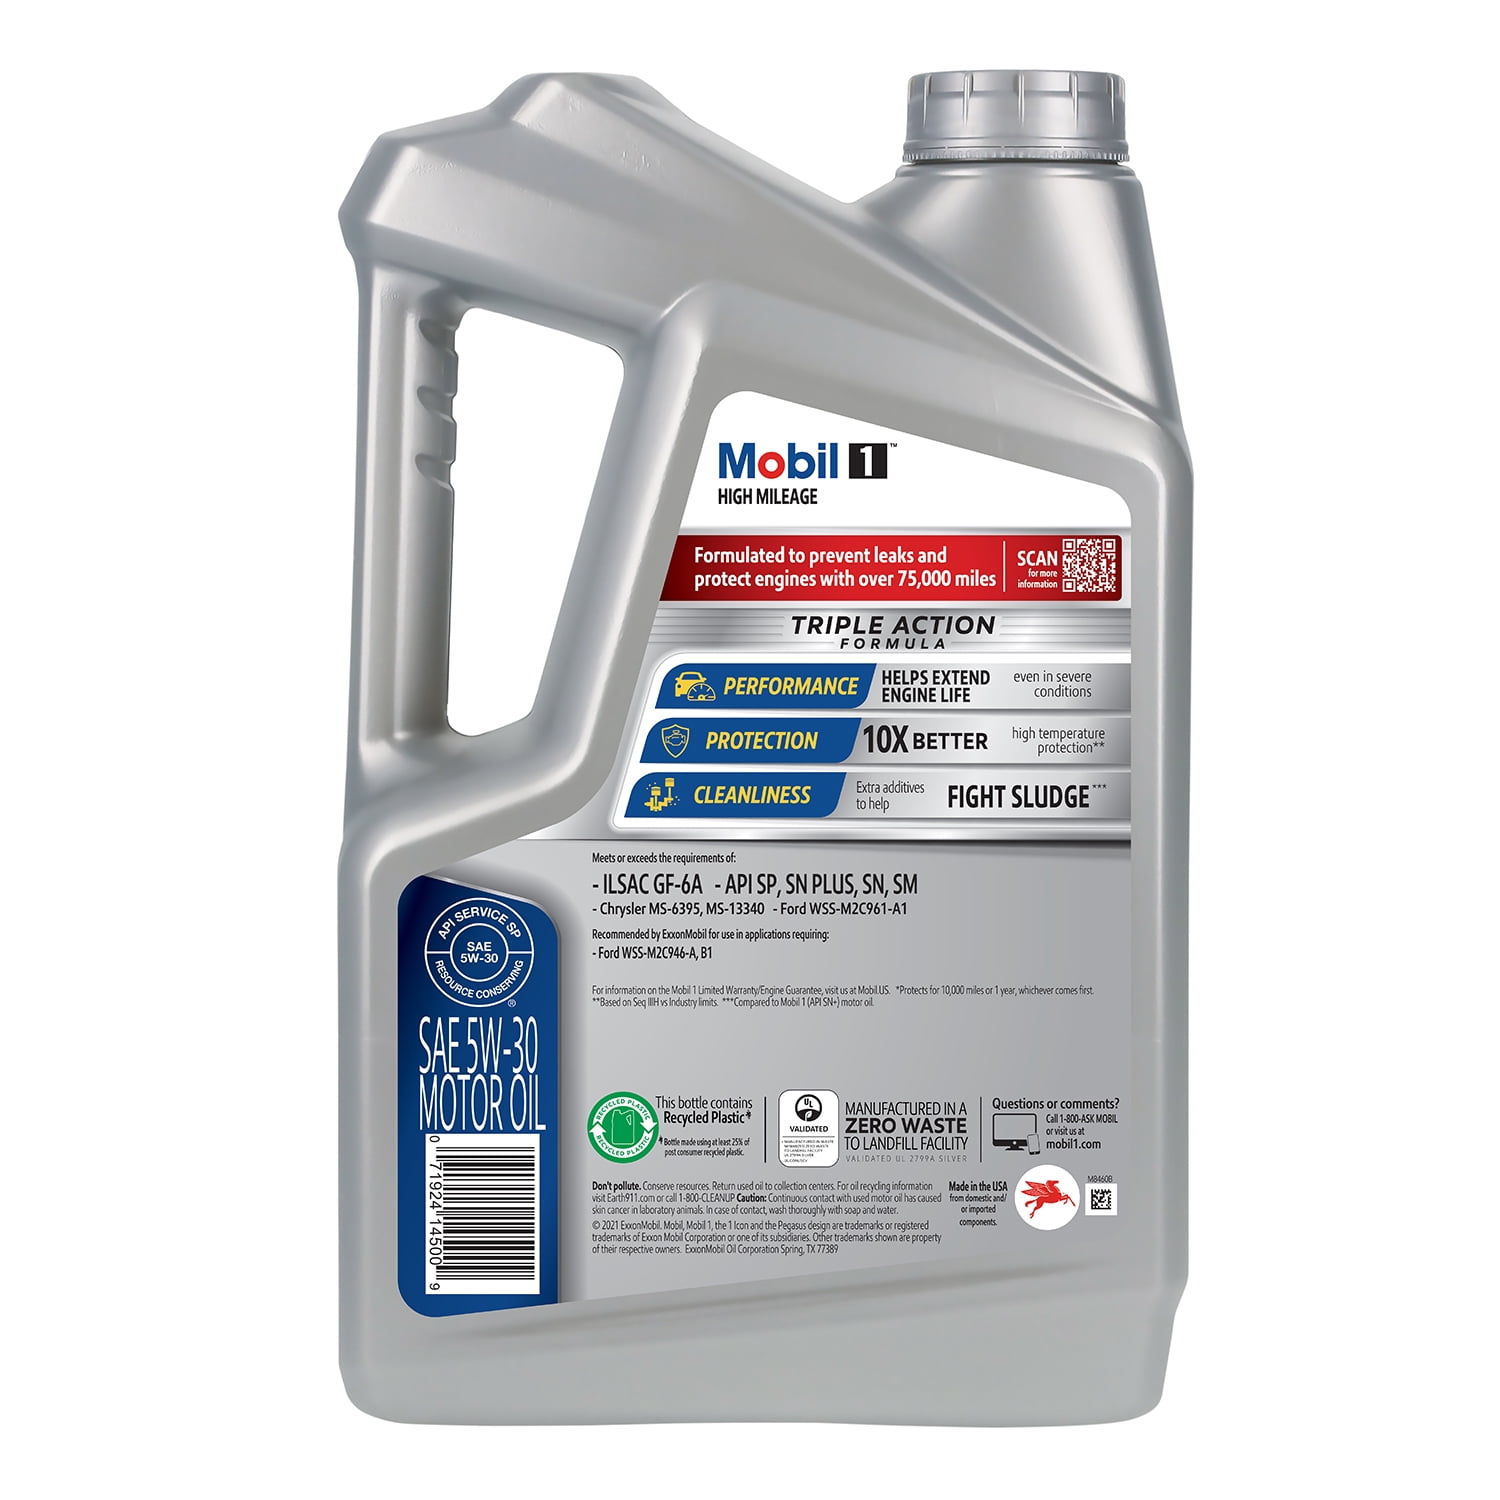 Mobil 1 High Mileage Full Synthetic Motor Oil 5W-30, 5 qt (3 Pack) - 3